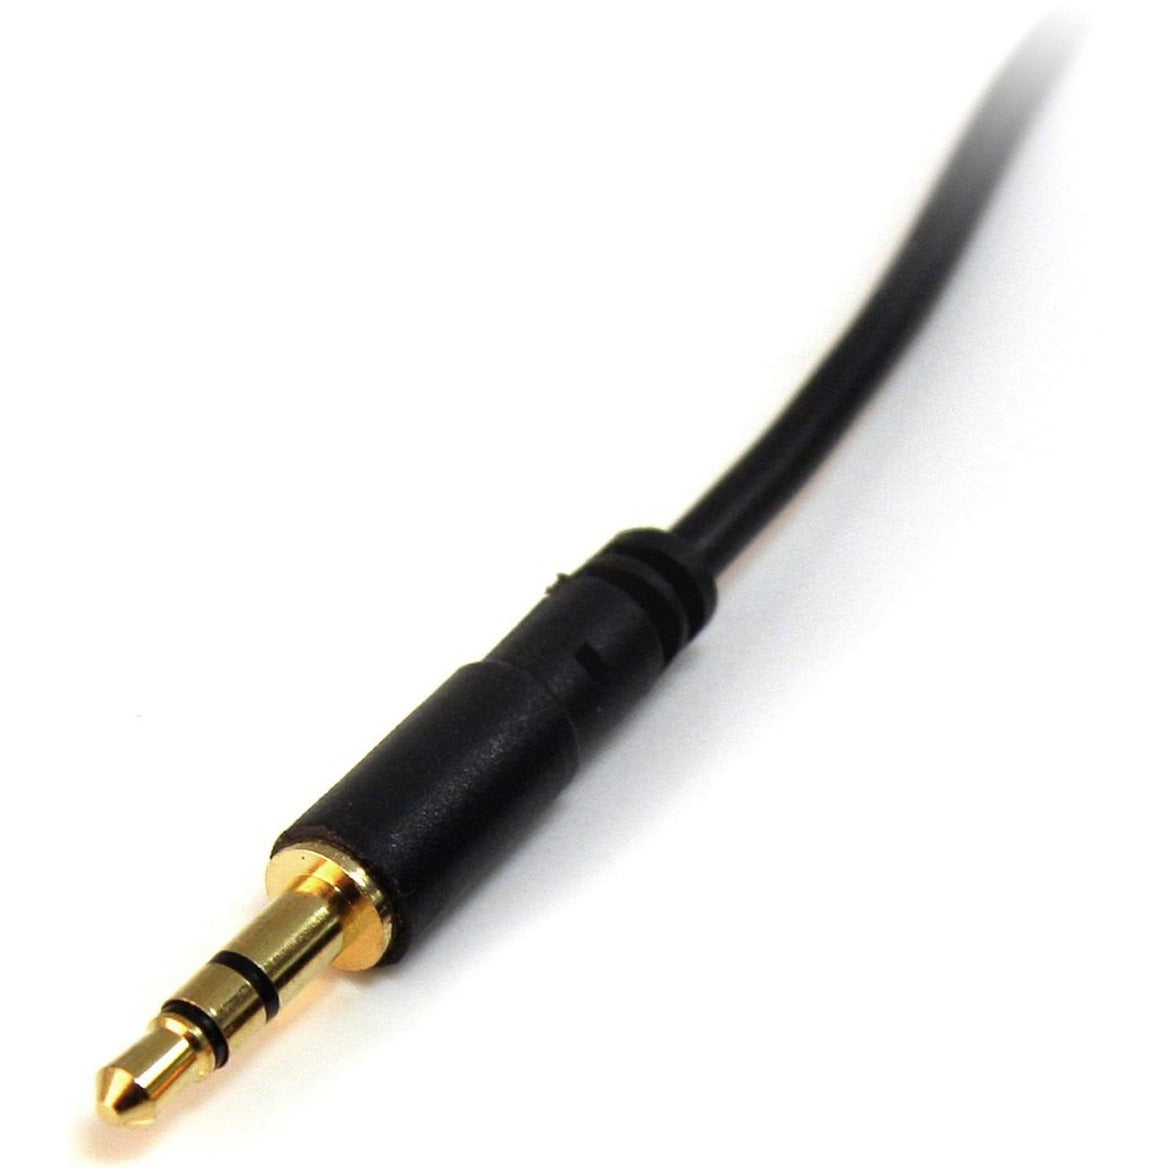 StarTech.com MU6MMS 6 ft Slim 3.5mm Stereo Audio Cable, Molded, Gold Plated, for iPhone, iPod, iPad, MP3 Player, Headphone